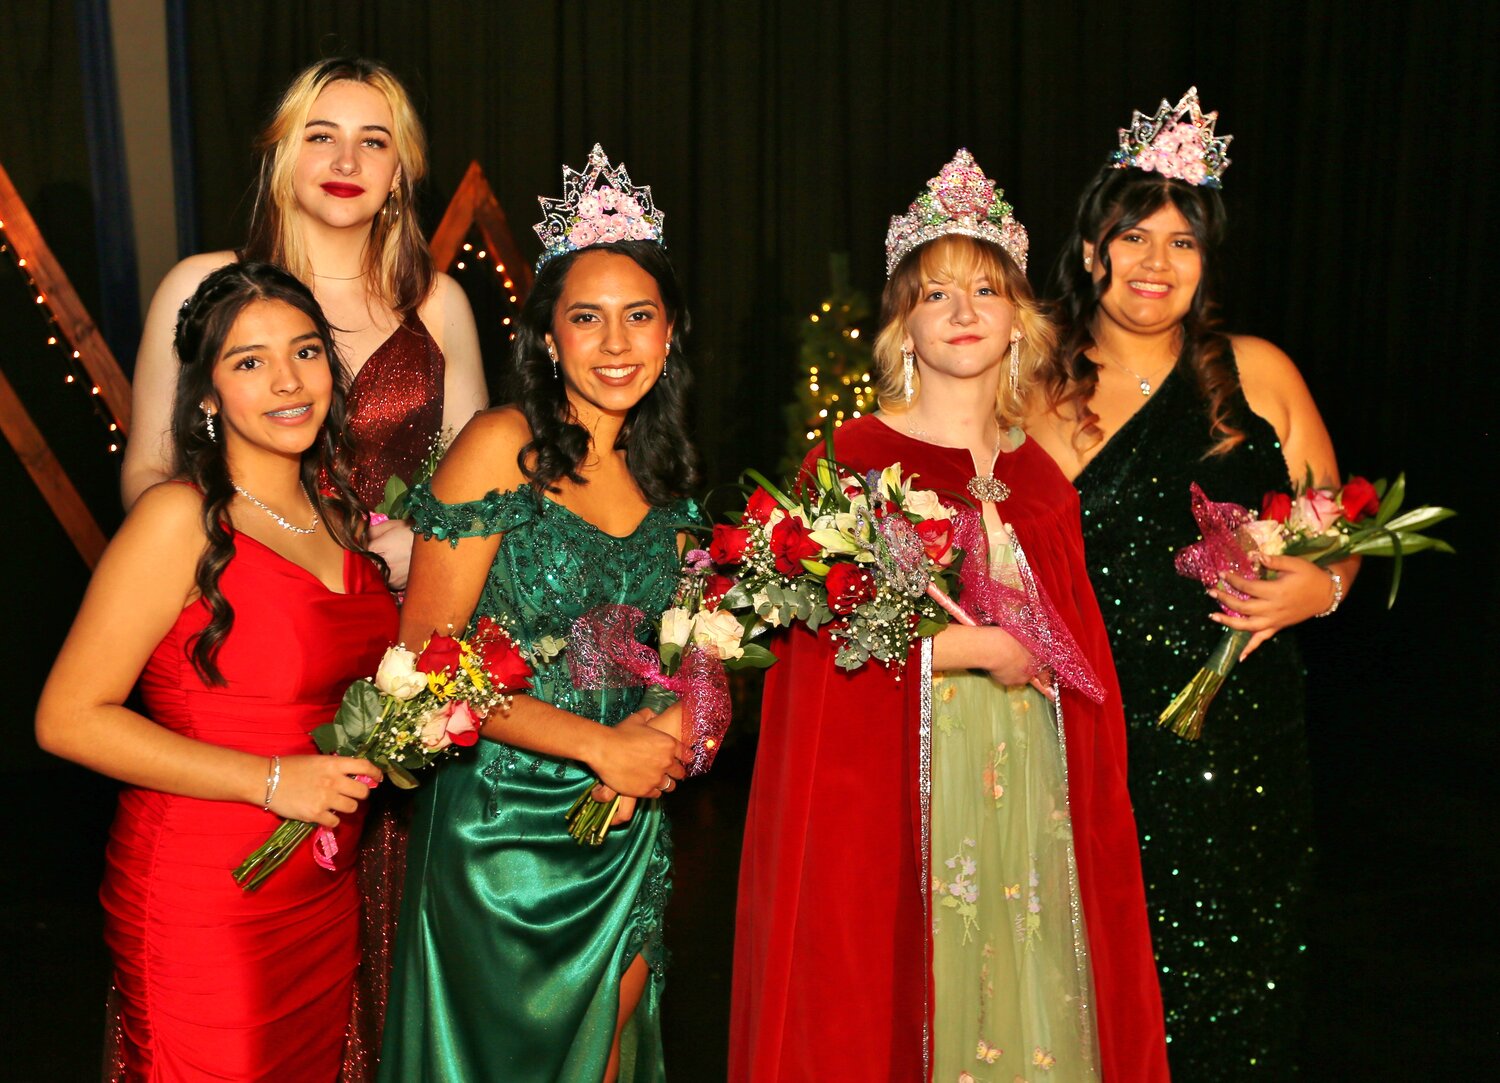 Left to right: candidate Lexi Cesar, candidate Aniyah Galdarisi, Princess Natalee Reyna, Queen Isabelle Harris and Princess Liliana Narvaez.